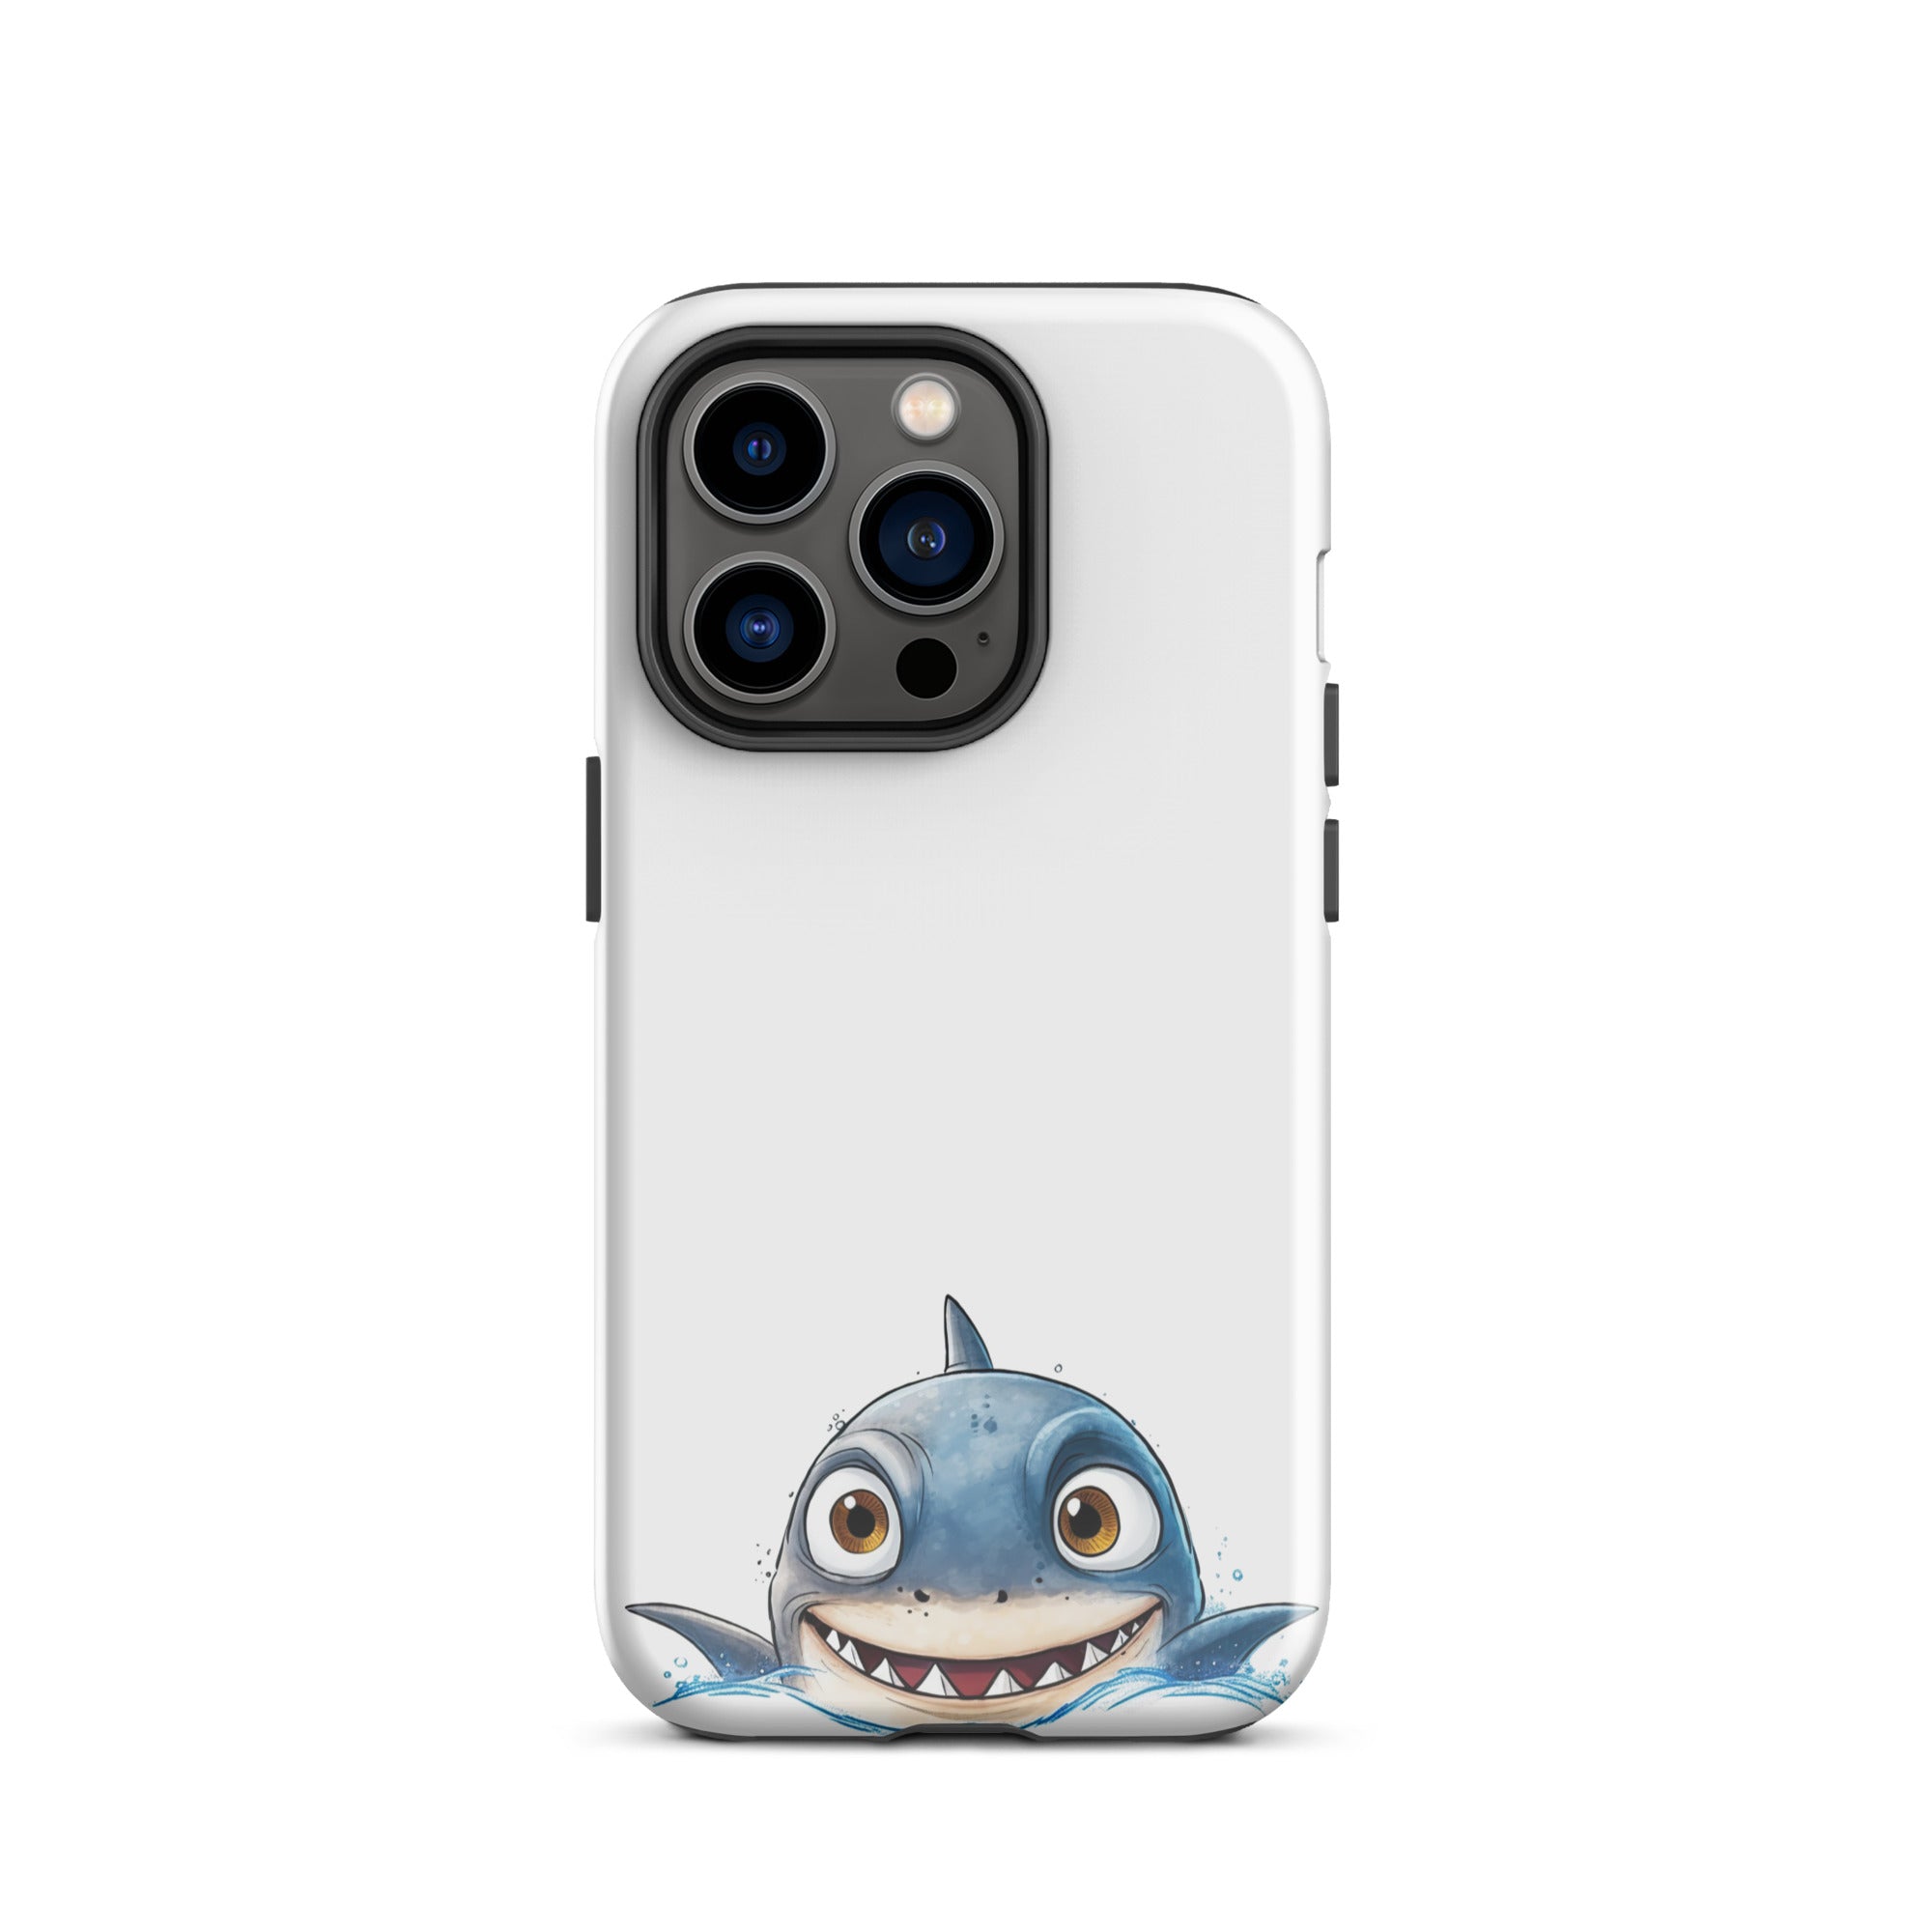 tough-case-for-iphone-glossy-iphone-14-pro-front-65638710b044c.jpg